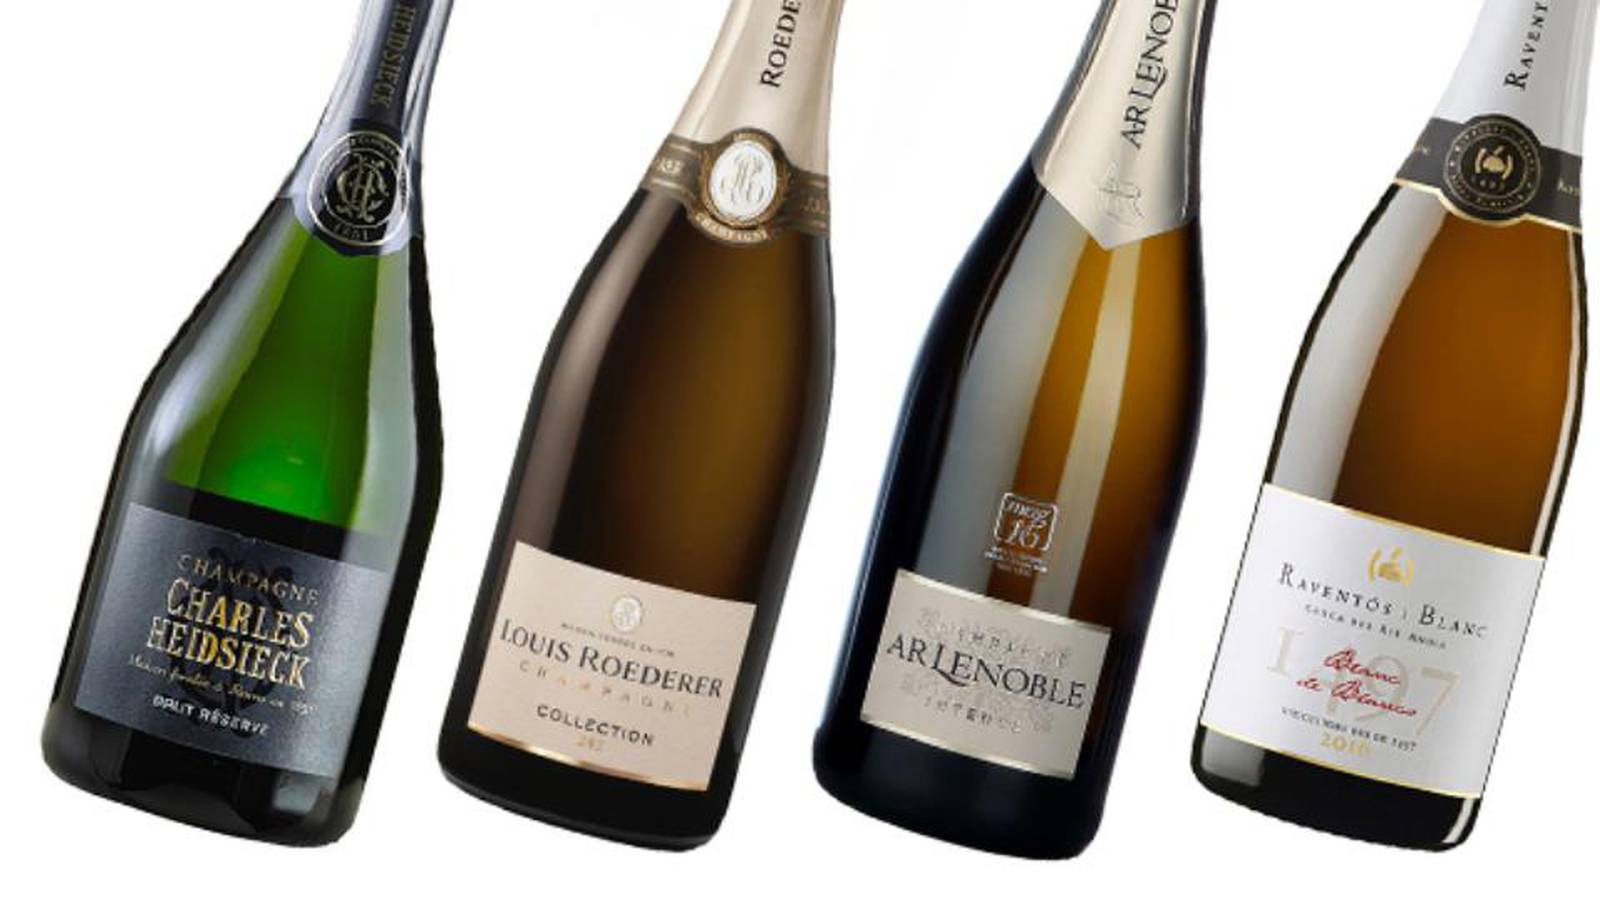 add sparkle Champagne to The Times Year – to New and Irish Christmas